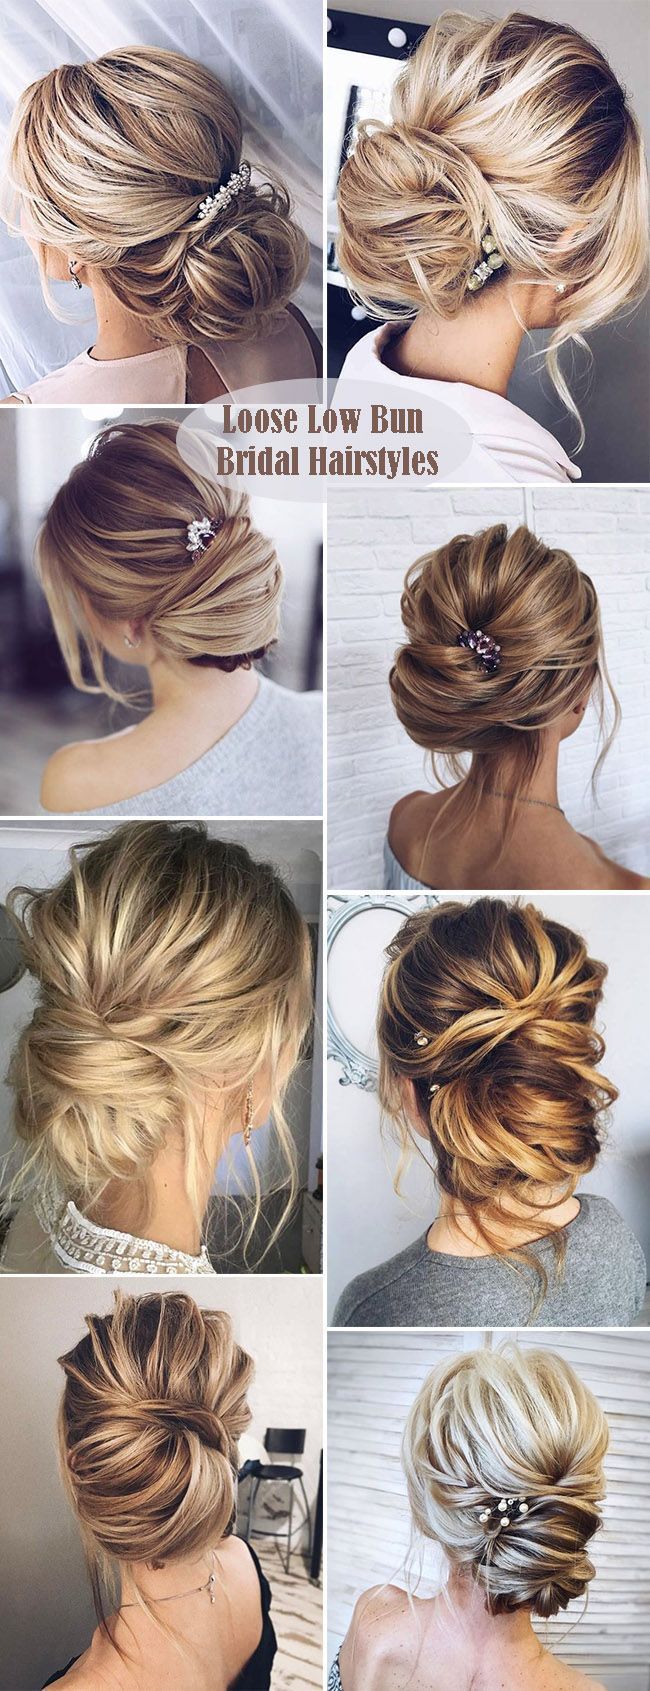 31 Drop-Dead Wedding Hairstyles for all Brides -   24 simple style wedding
 ideas